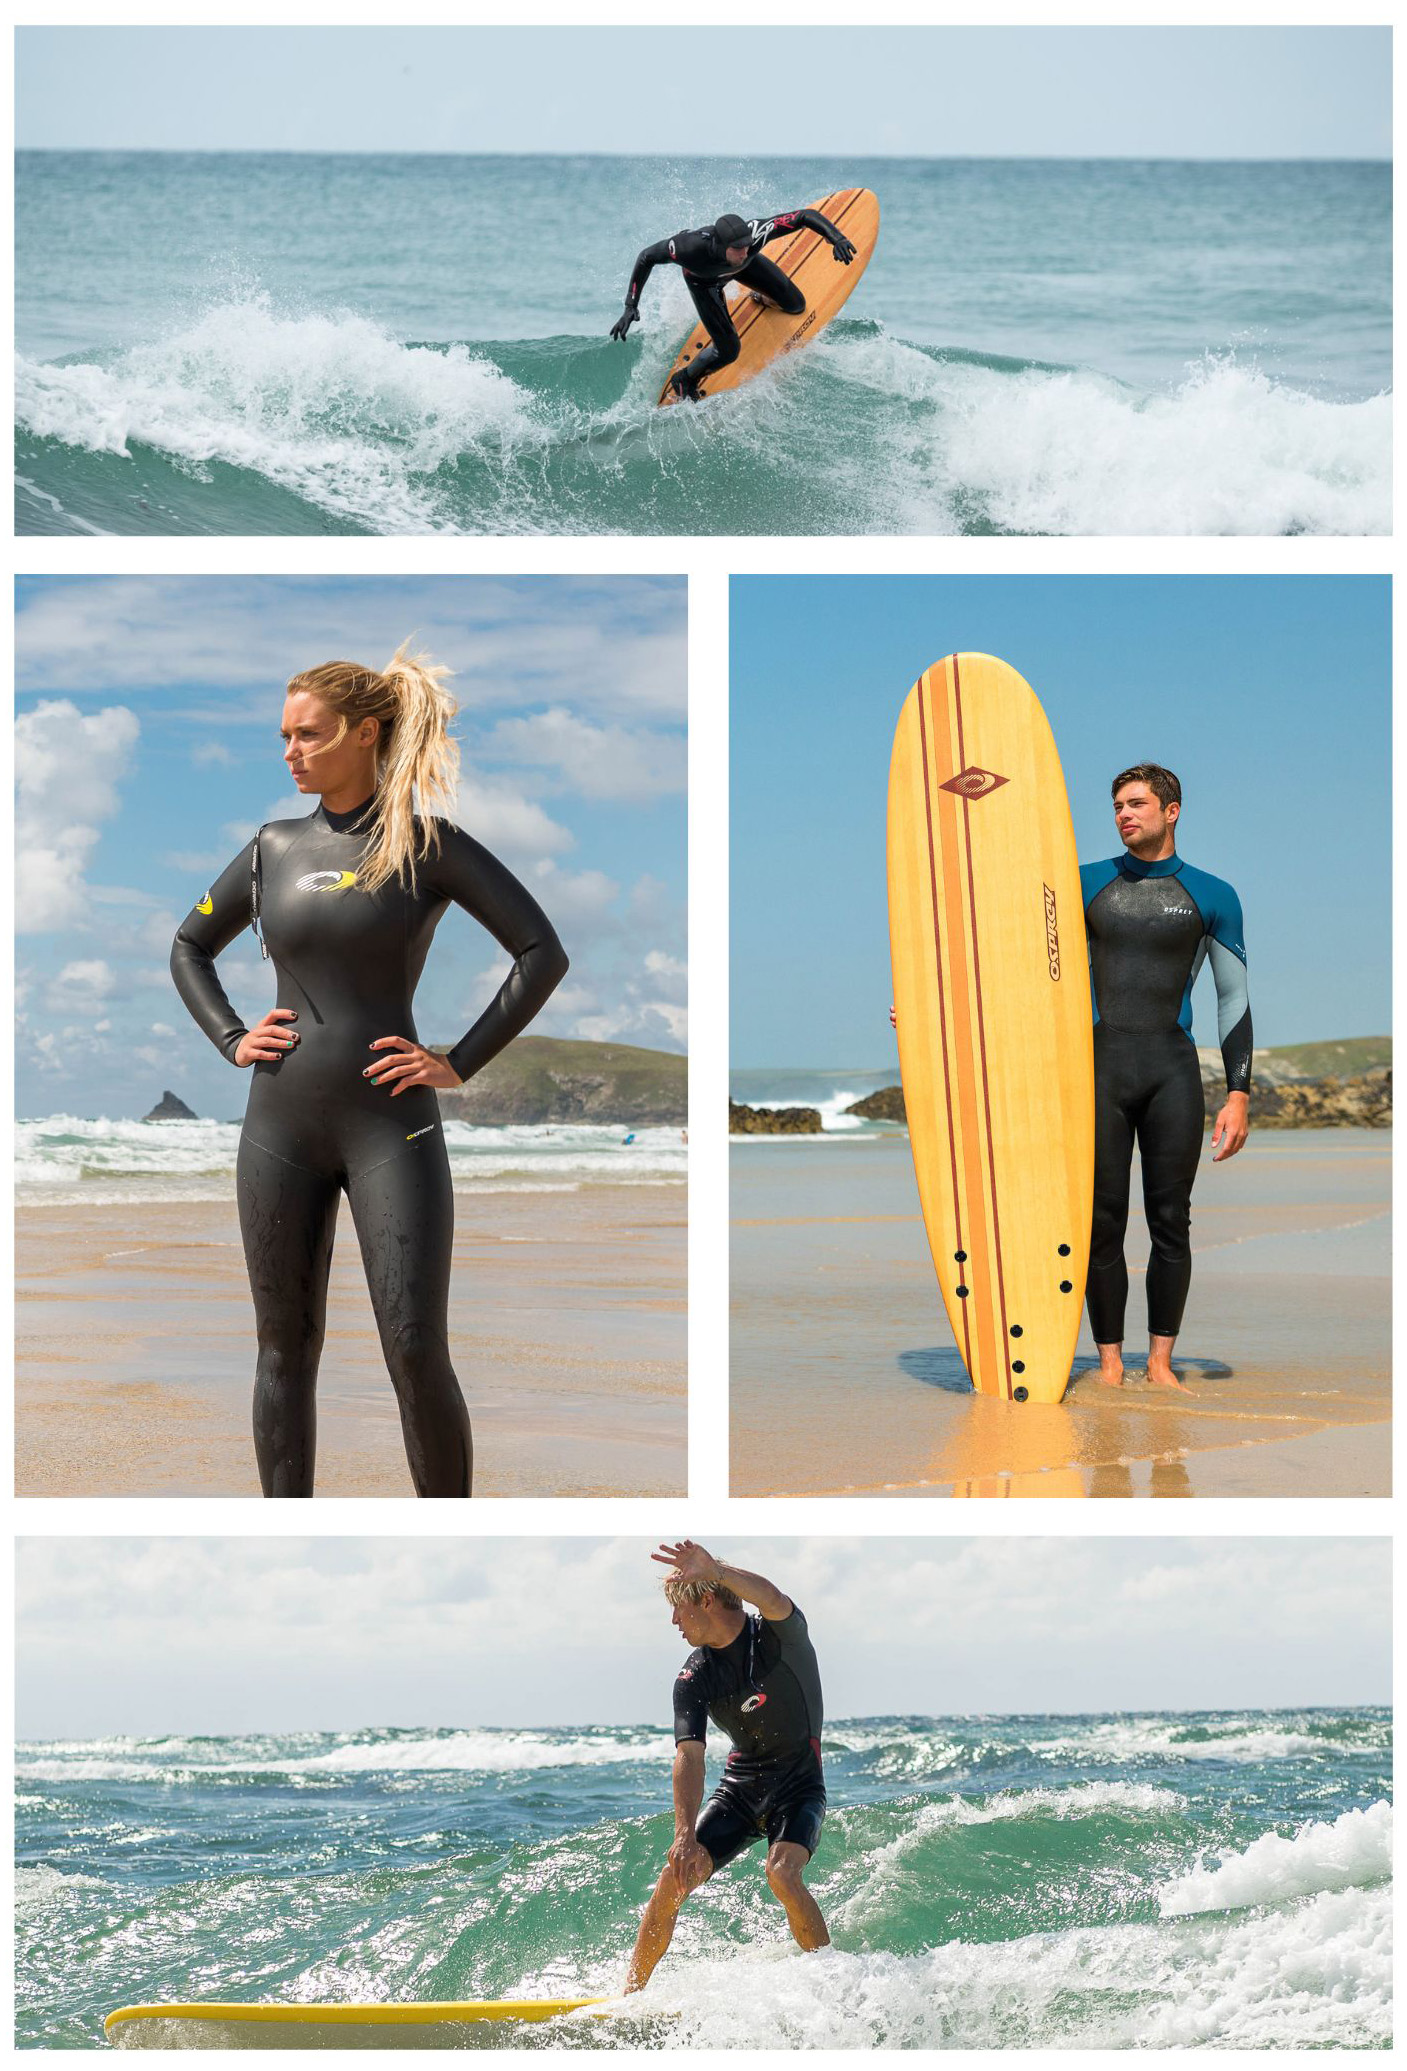 Male and female models posing on the beach in full length wetsuits